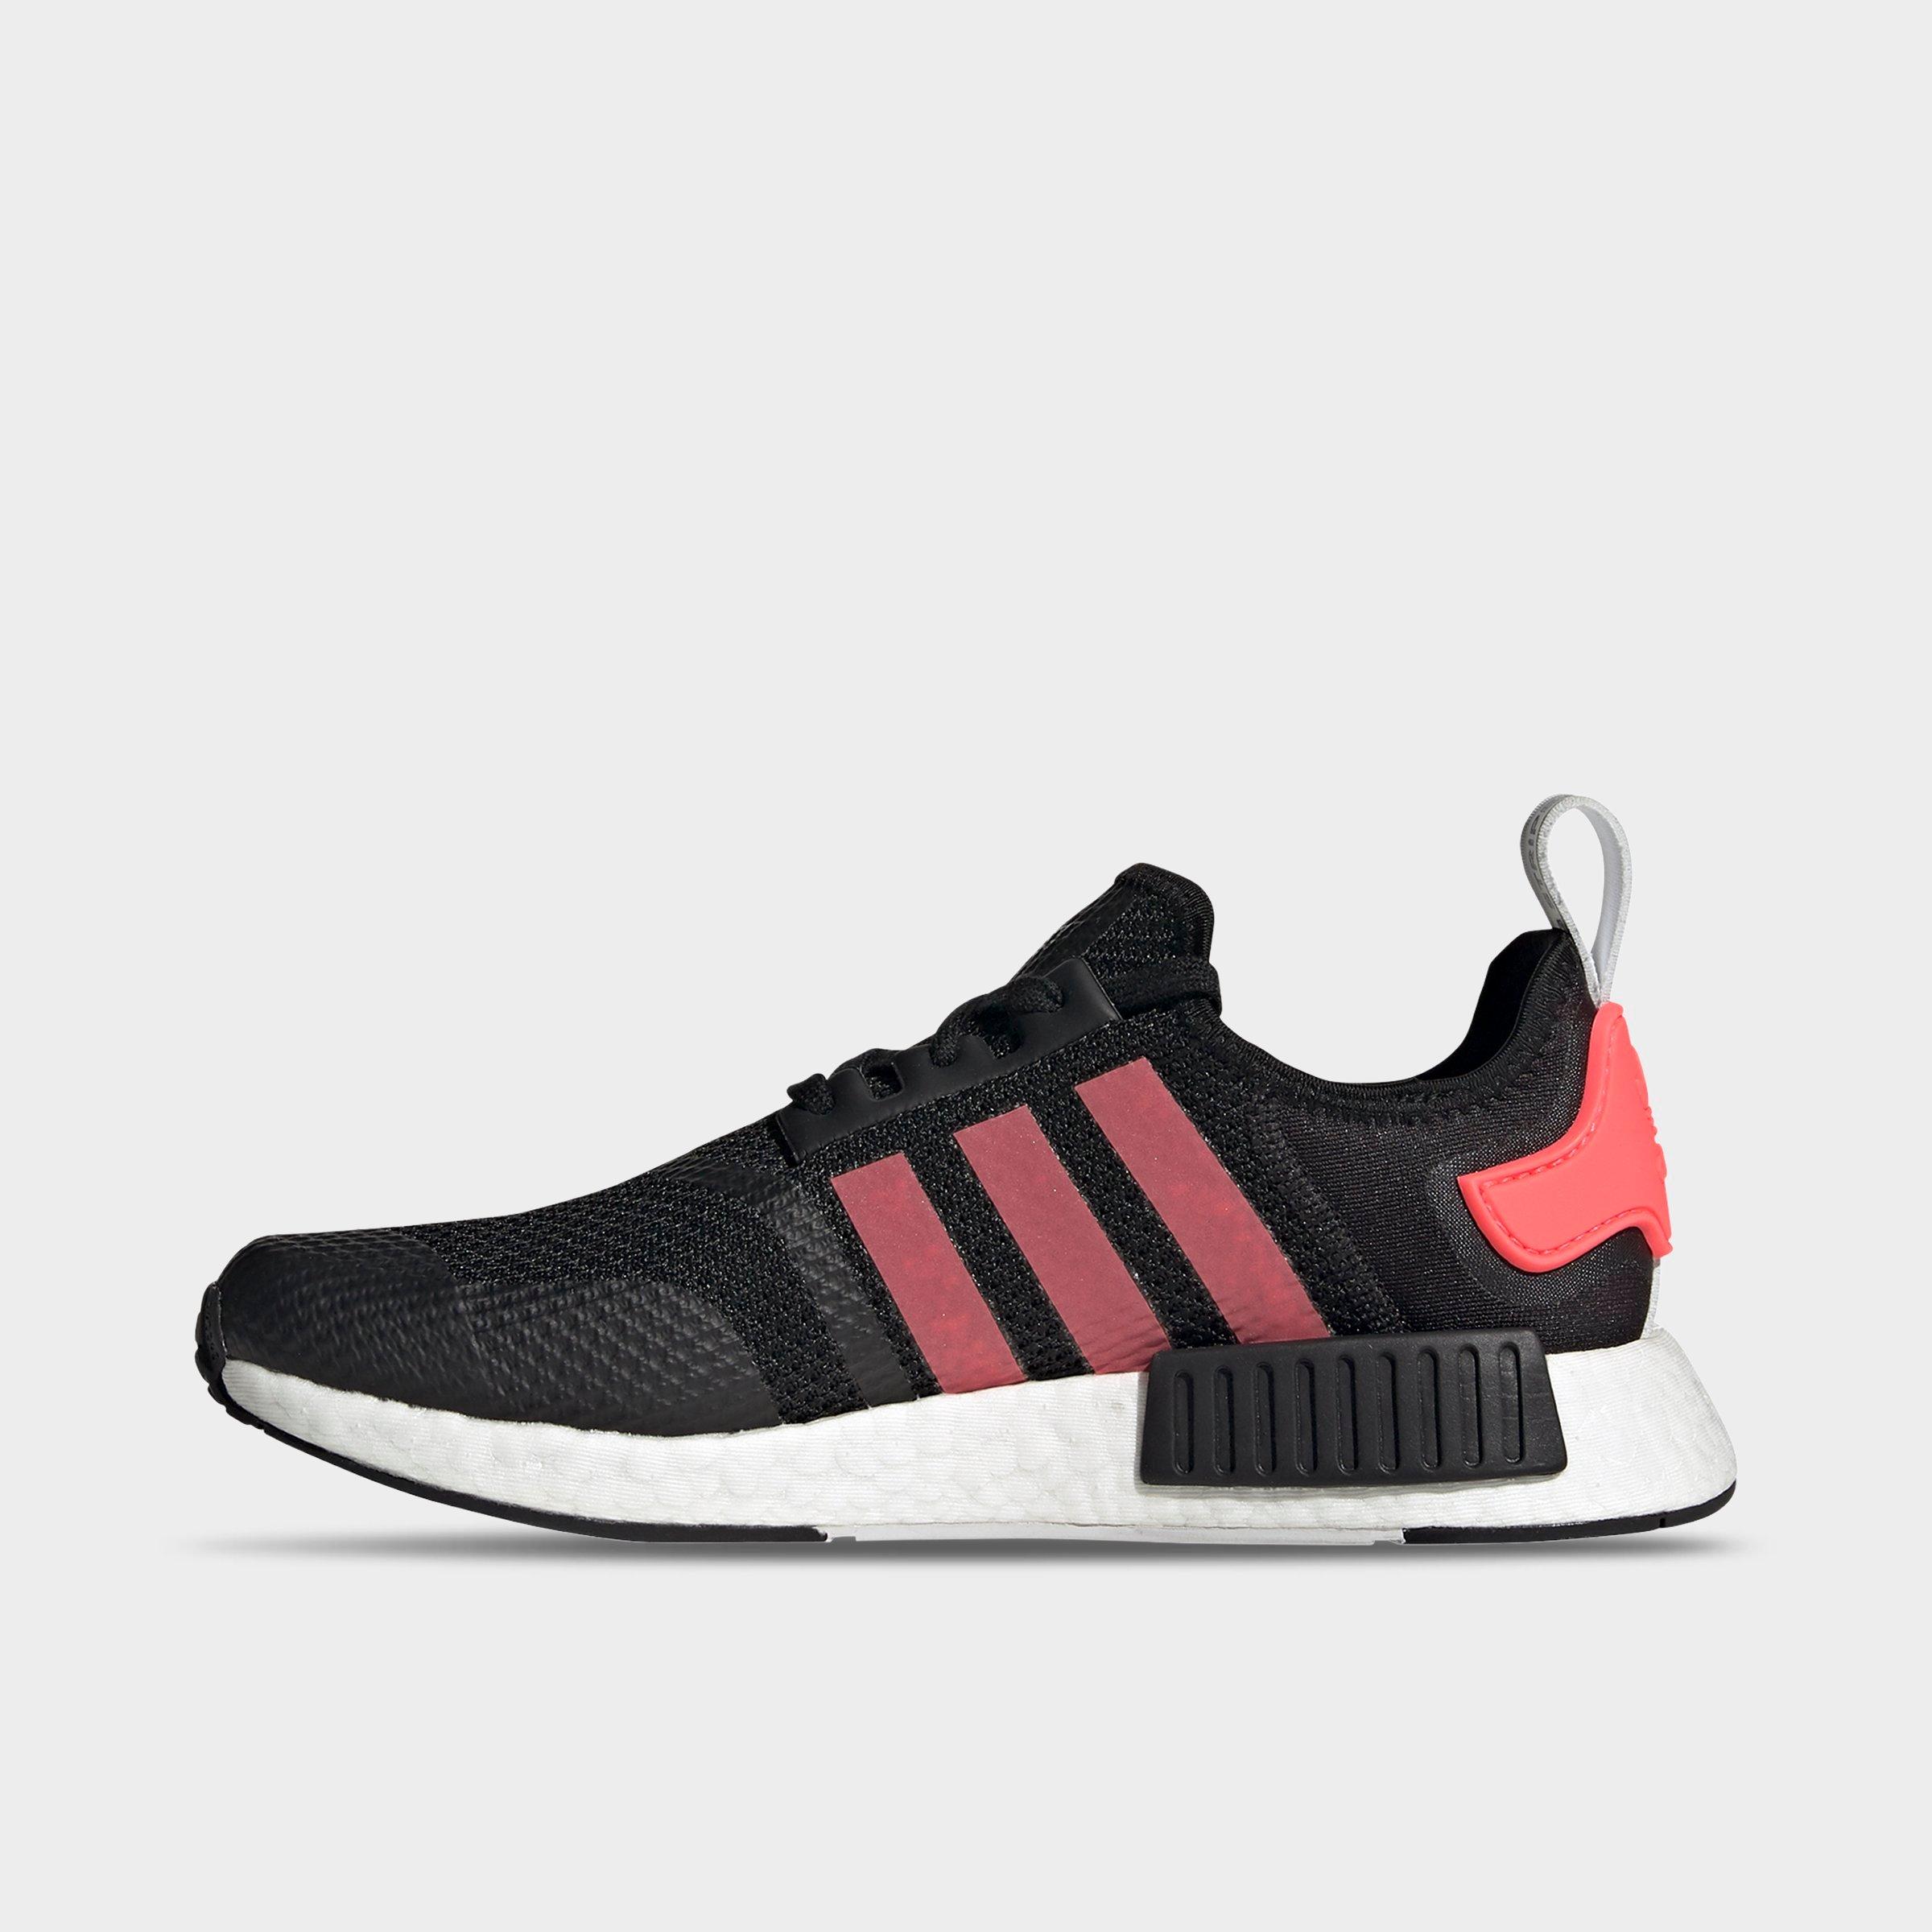 adidas NMD Shoes for Men, Women, Kids 